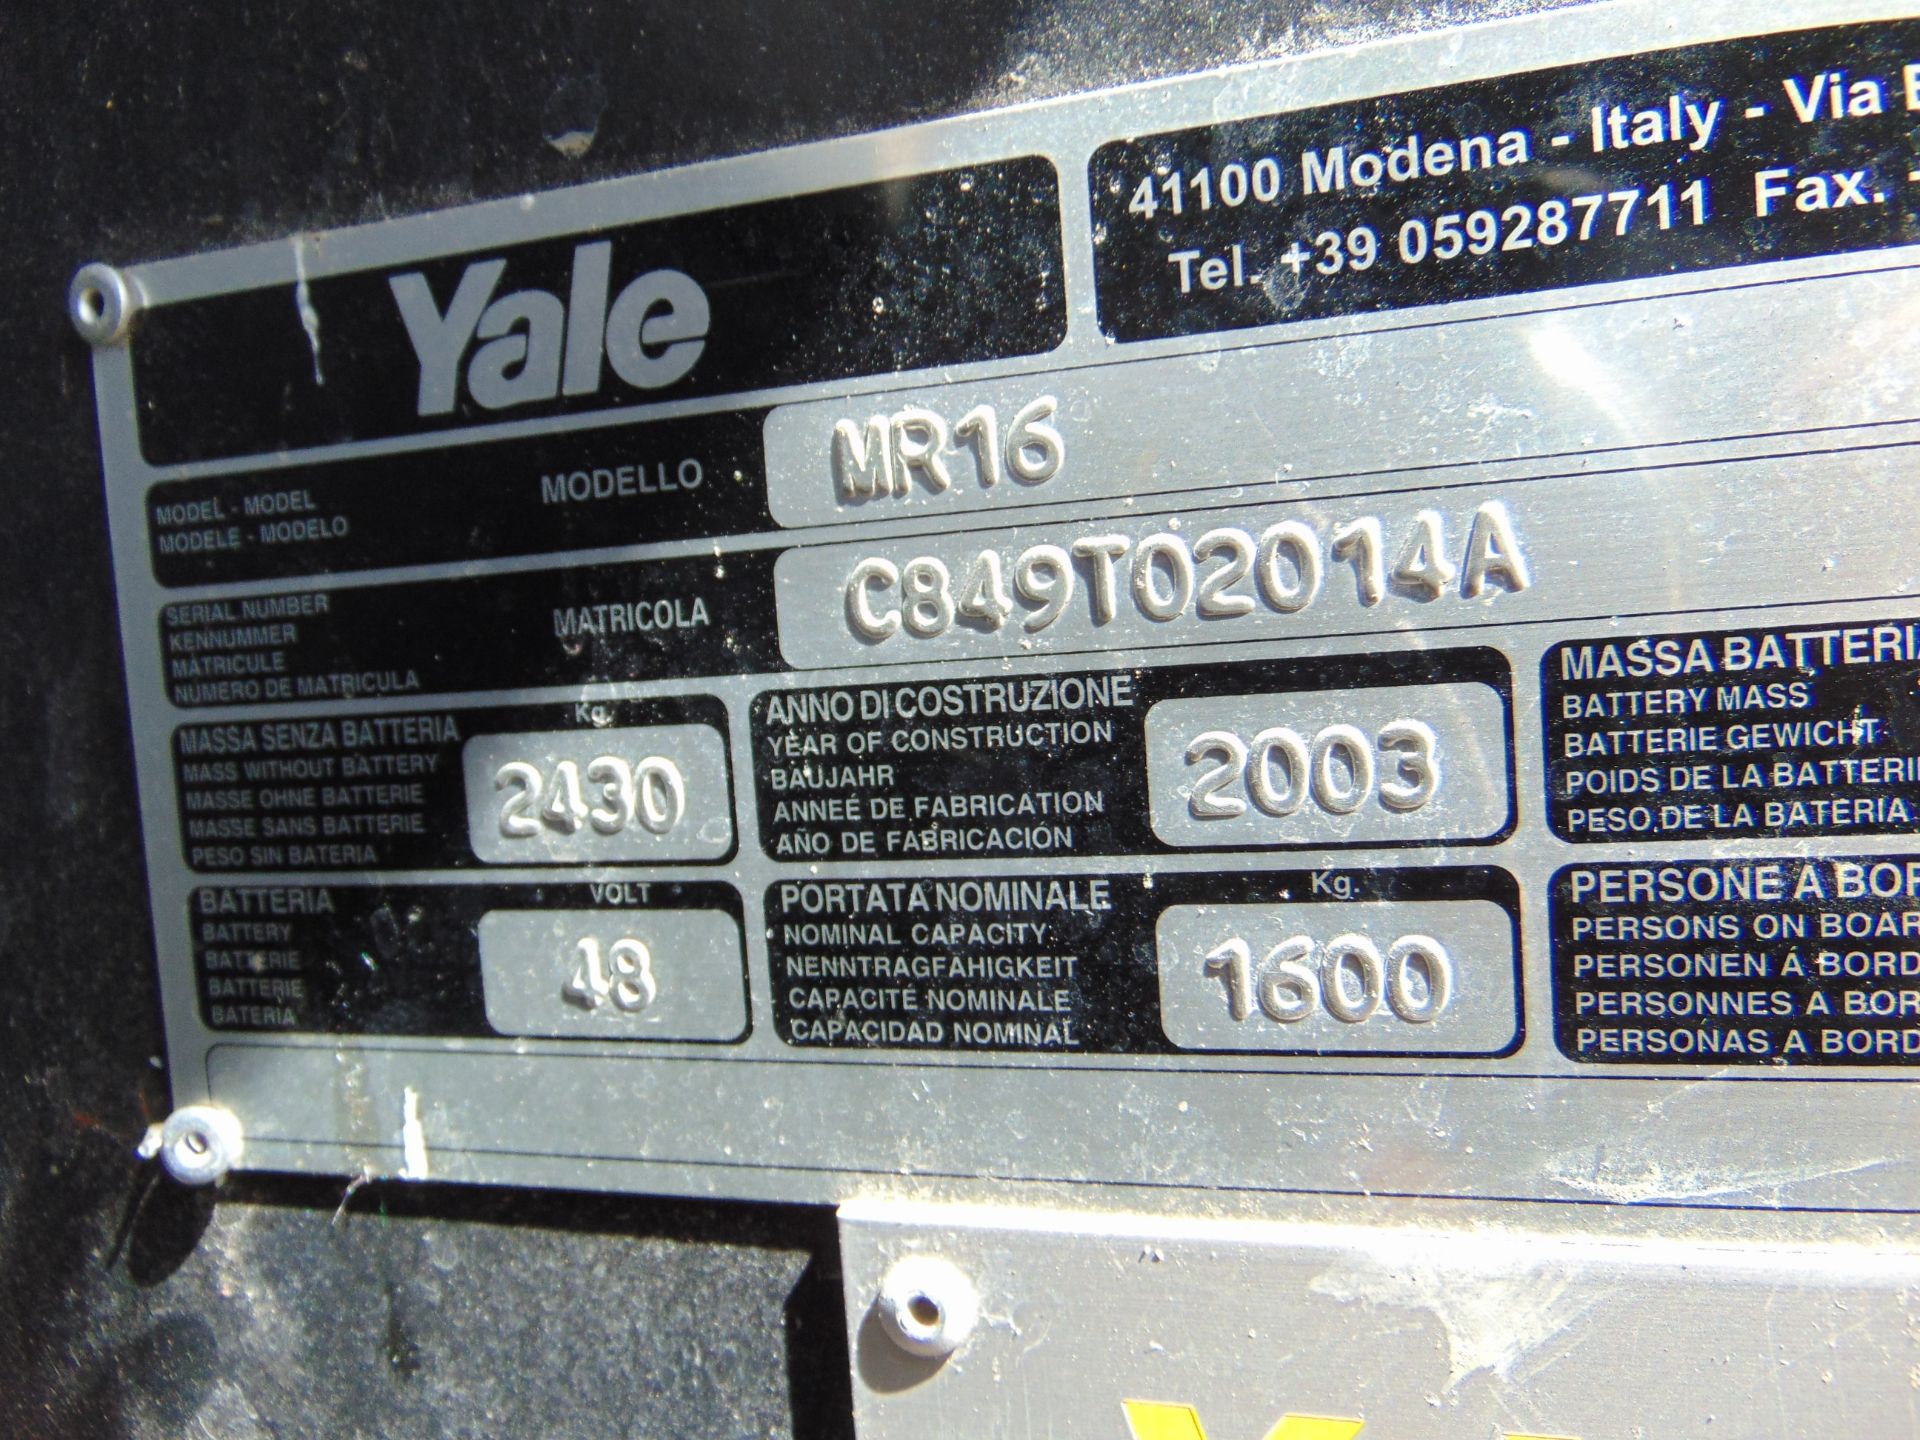 Yale MR16 Electric Reach Fork Lift Truck c/w Battery Charger ONLY 726 HOURS! - Image 14 of 14